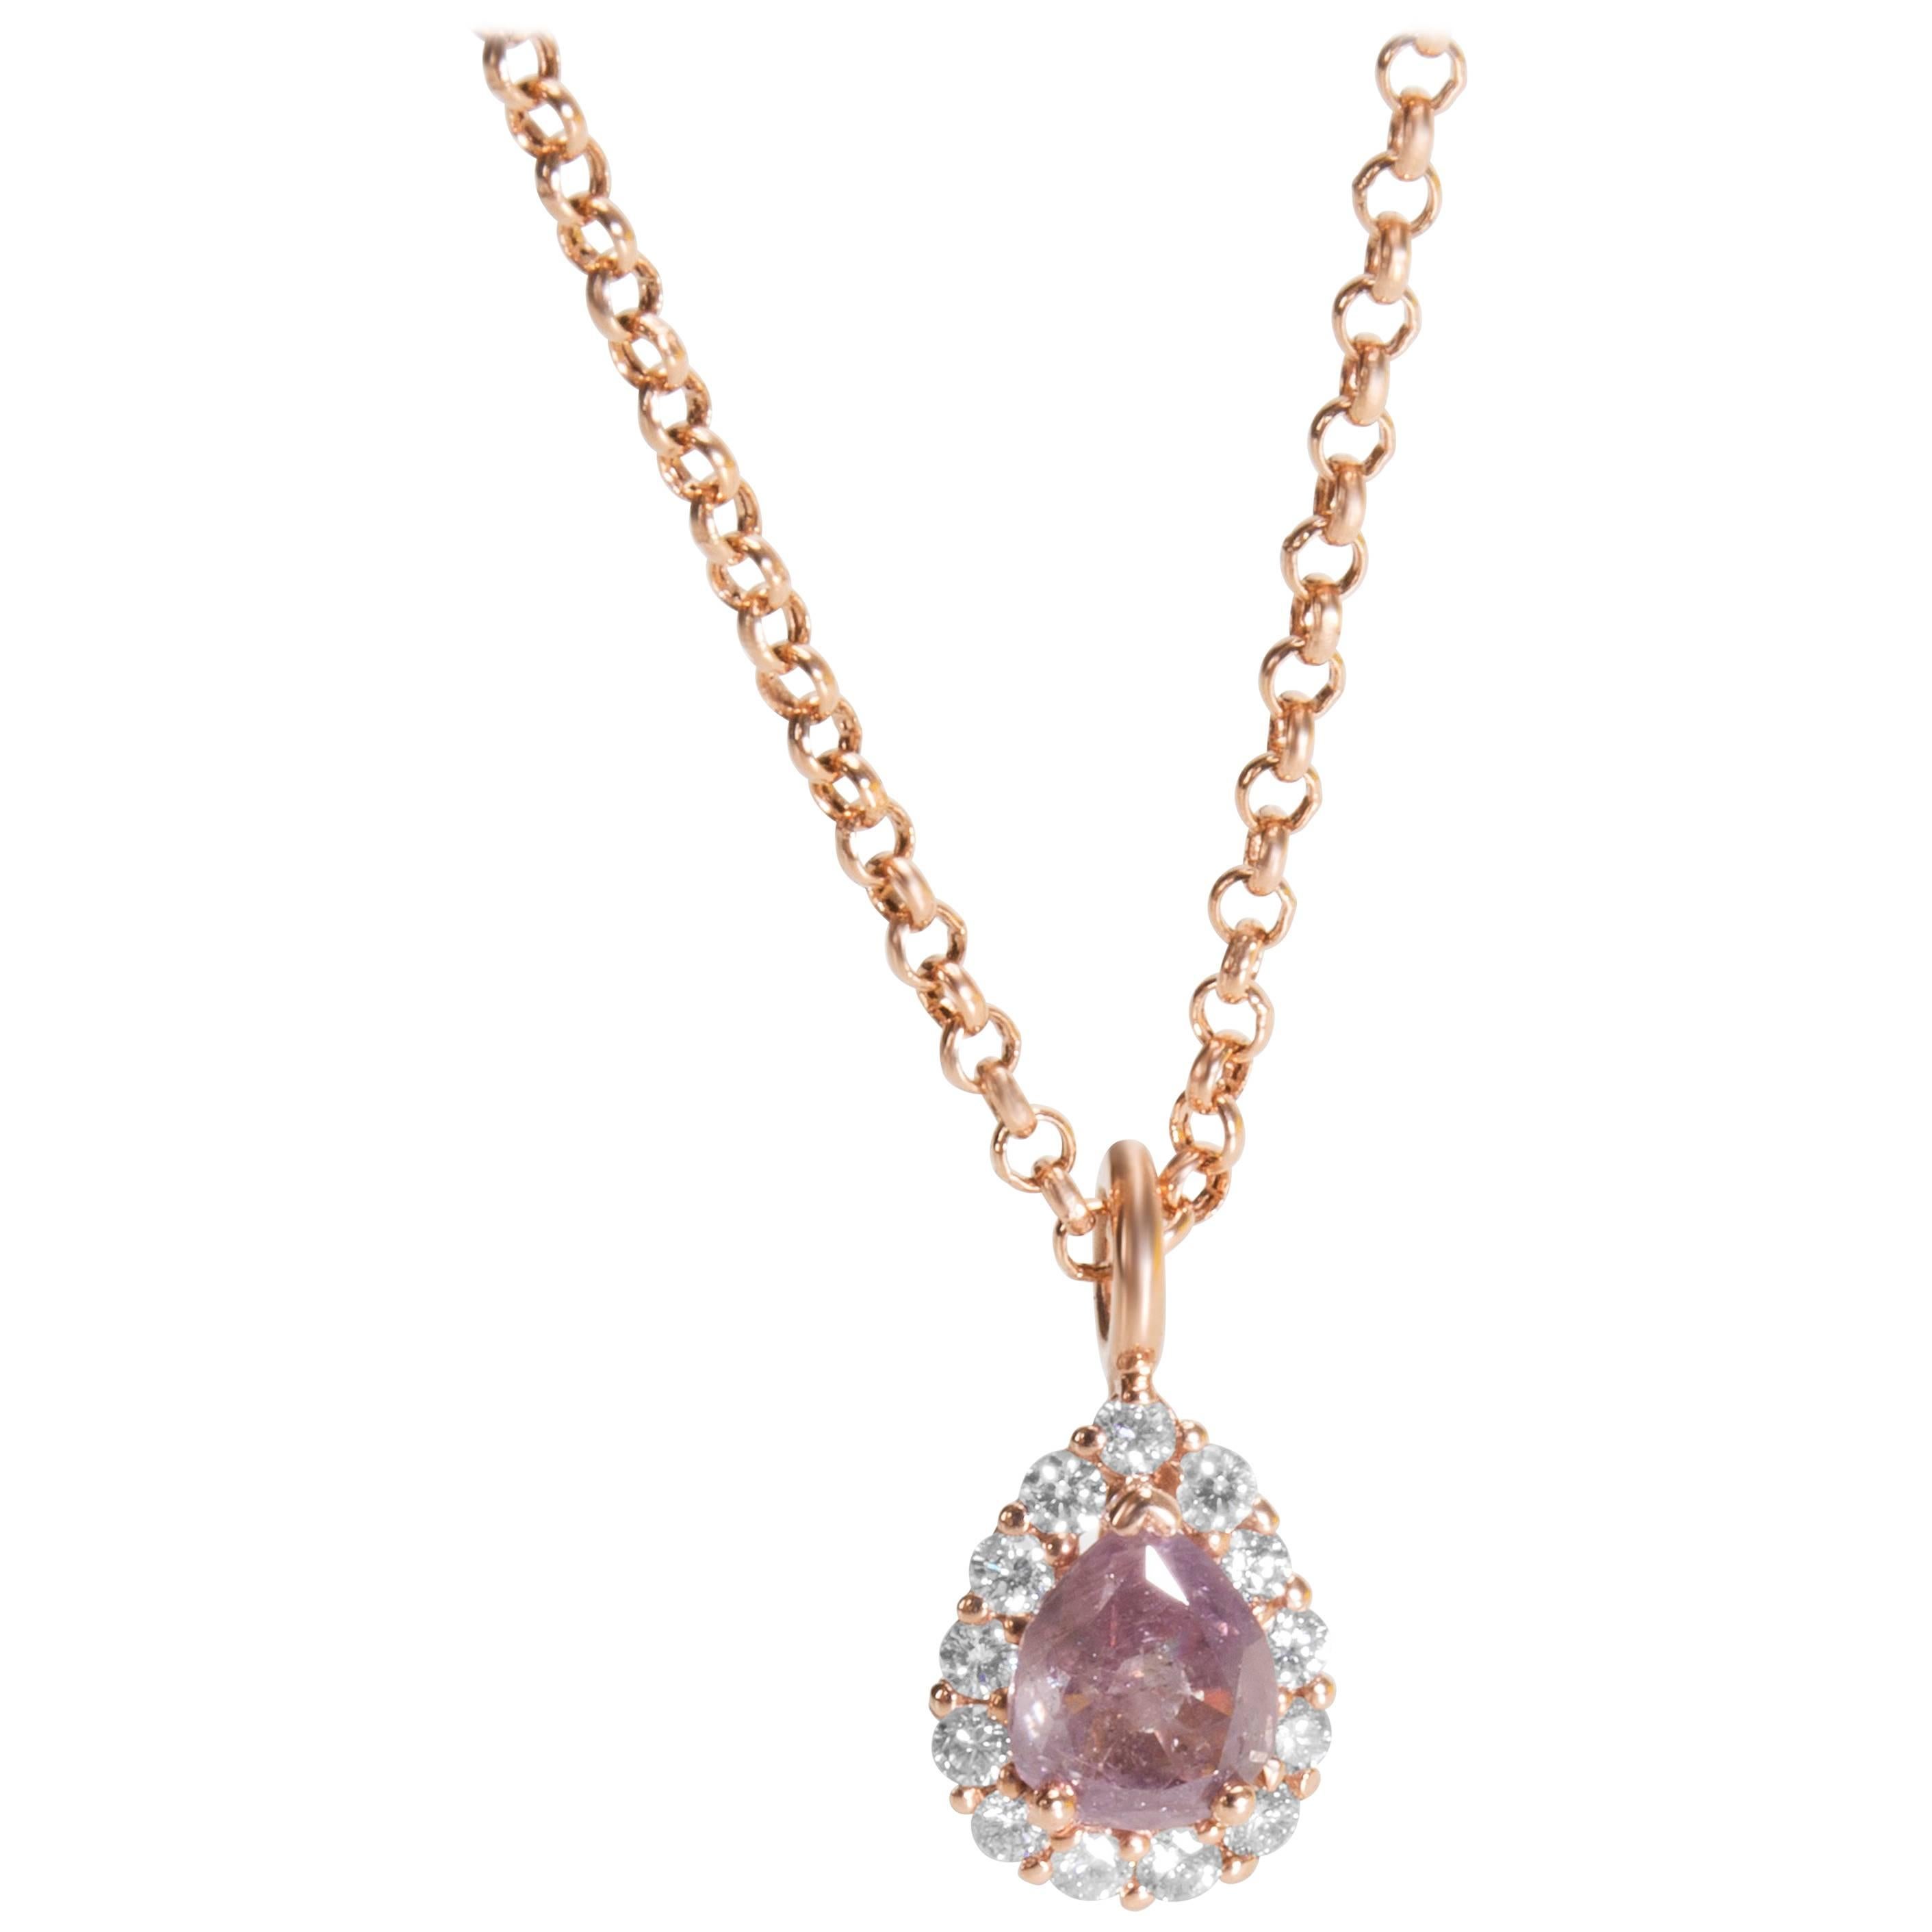 GIA Certified Natural Fancy Purple Pink Diamond Necklace 14kt Gold 1.20 Carats